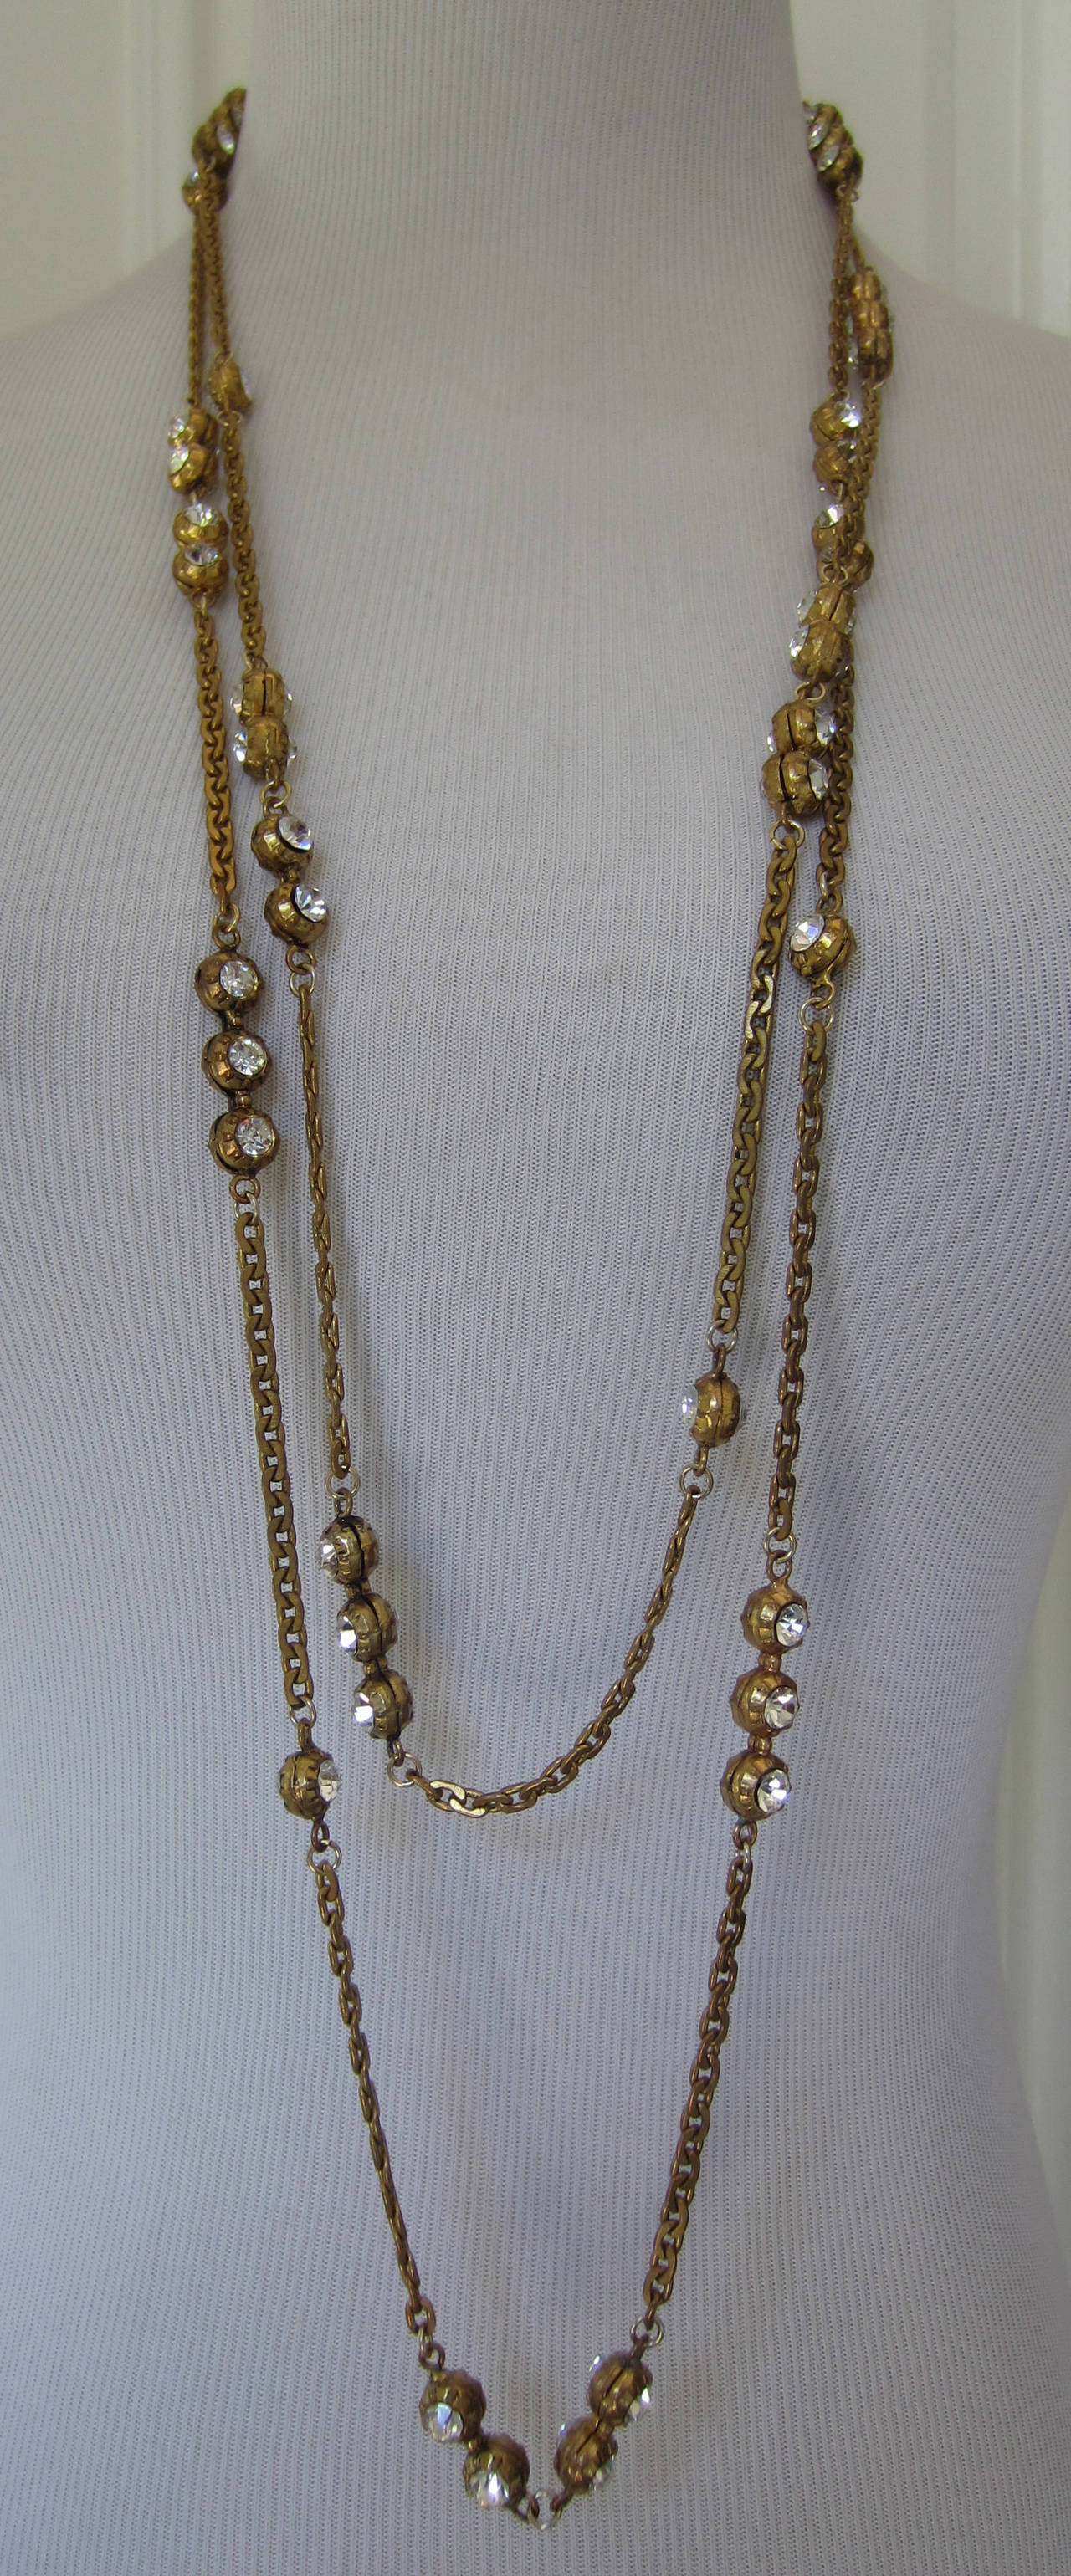 Modern Chic Chanel Long Necklace with Crystals